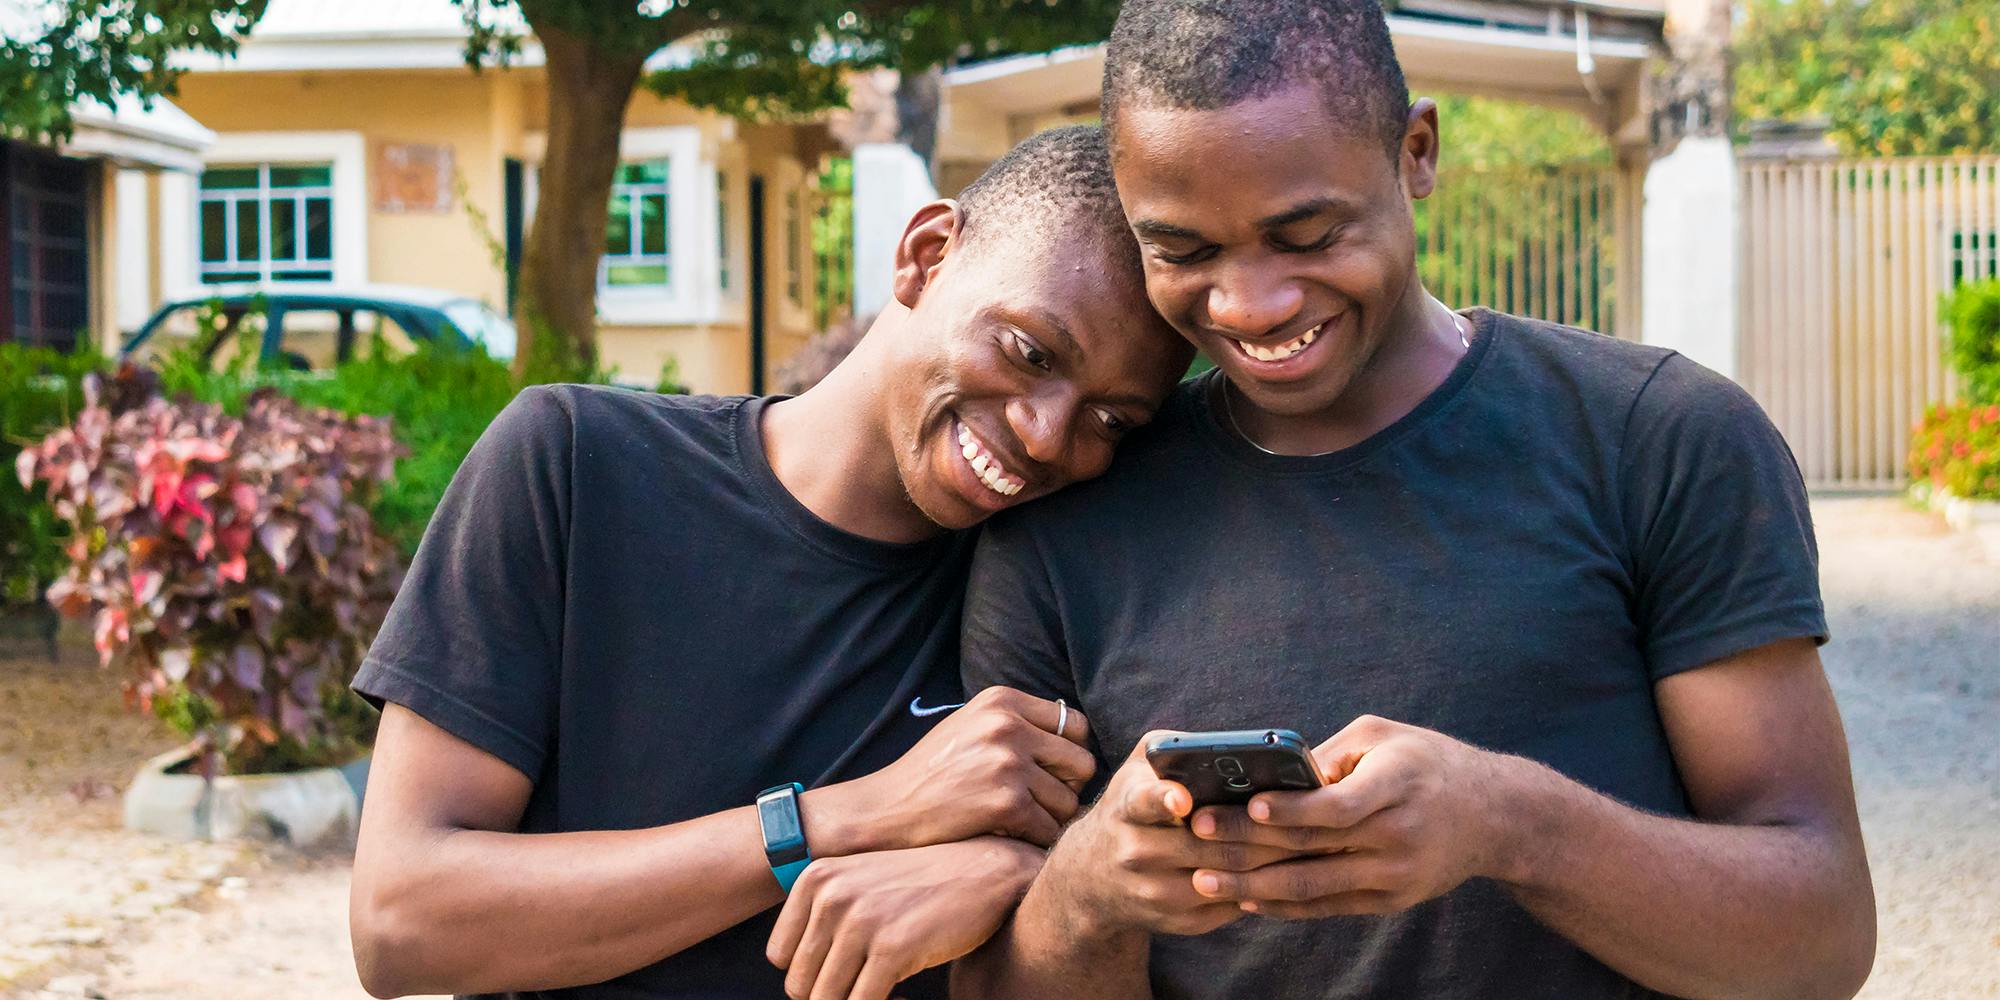 Two men smiling while looking at a phone